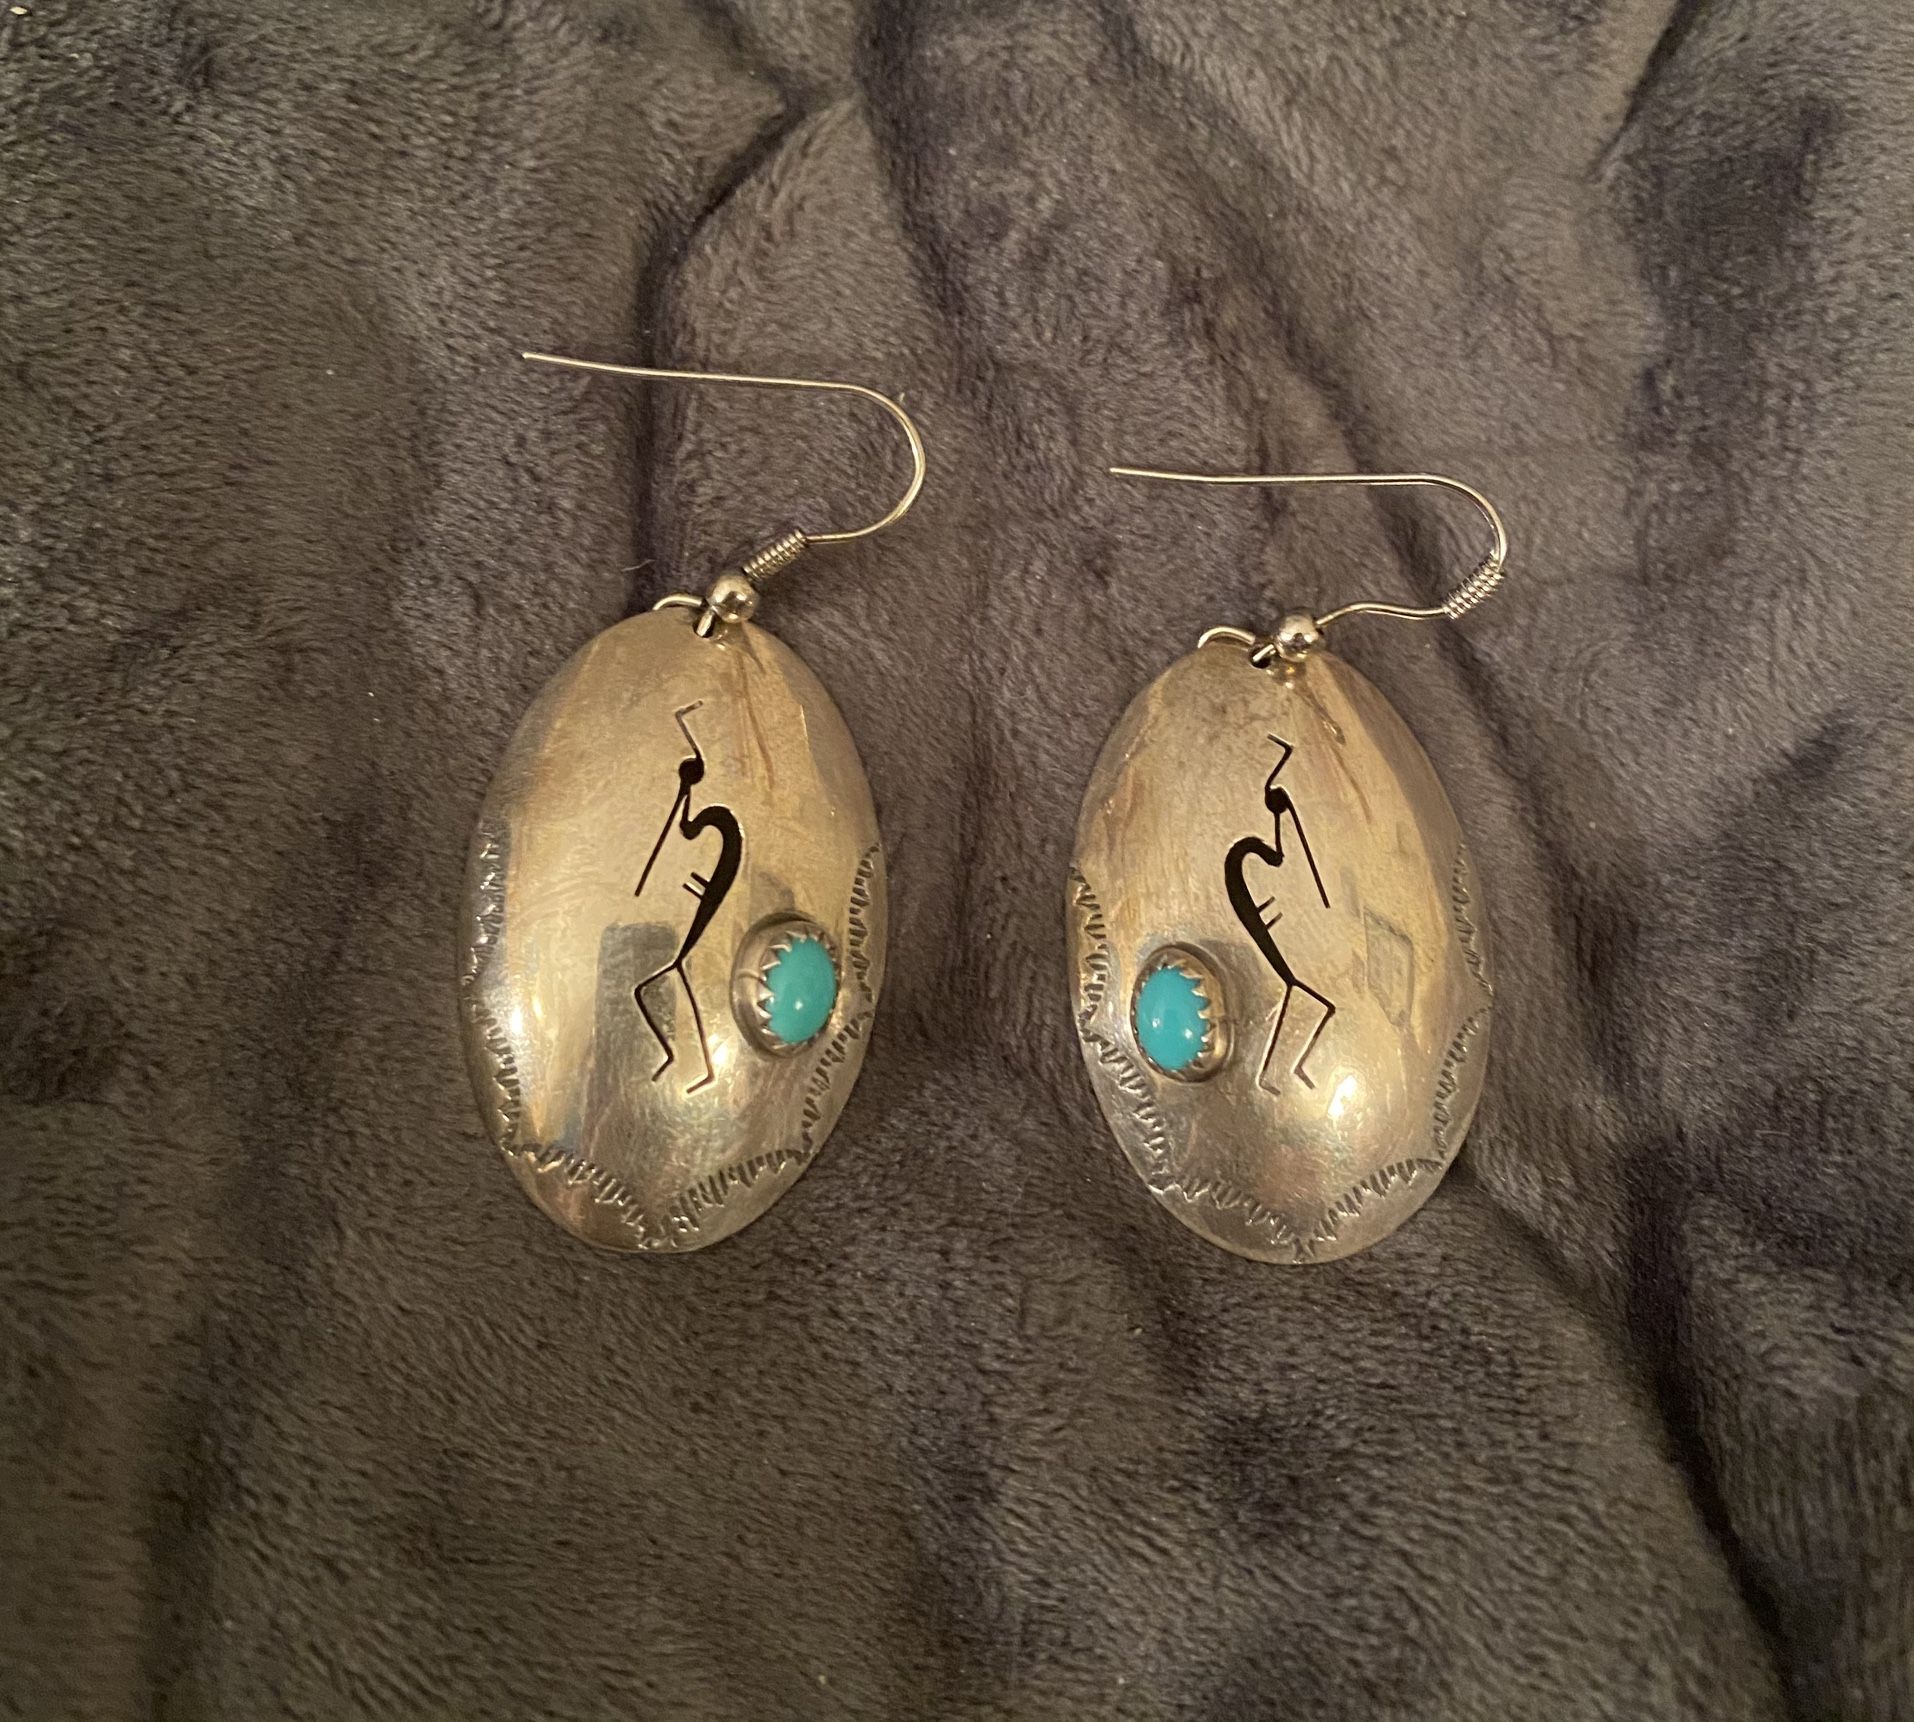 Vintage 1980’s Sterling Silver With Genuine Turquoise Earrings - Free Organza Gift Bag !